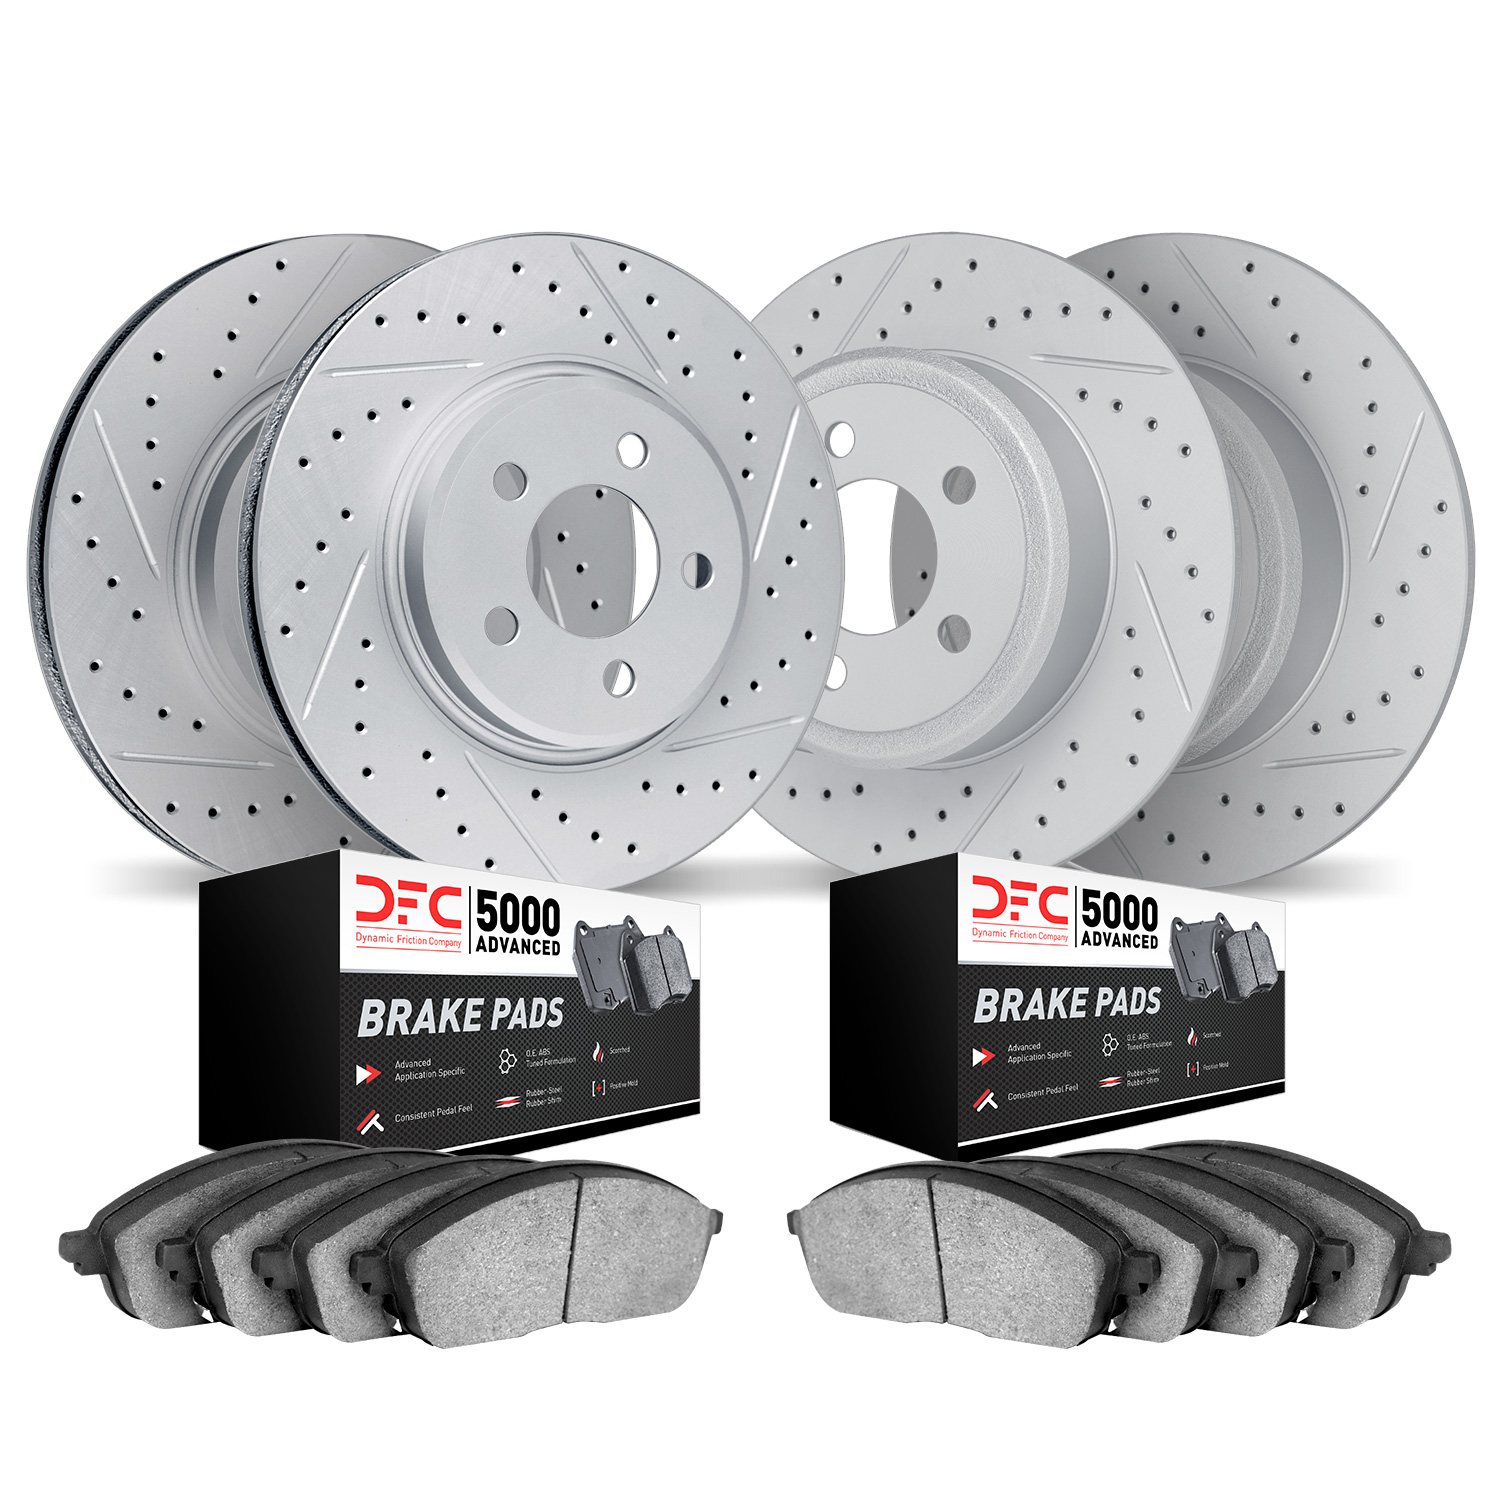 2504-54304 Geoperformance Drilled/Slotted Rotors w/5000 Advanced Brake Pads Kit, Fits Select Ford/Lincoln/Mercury/Mazda, Positio